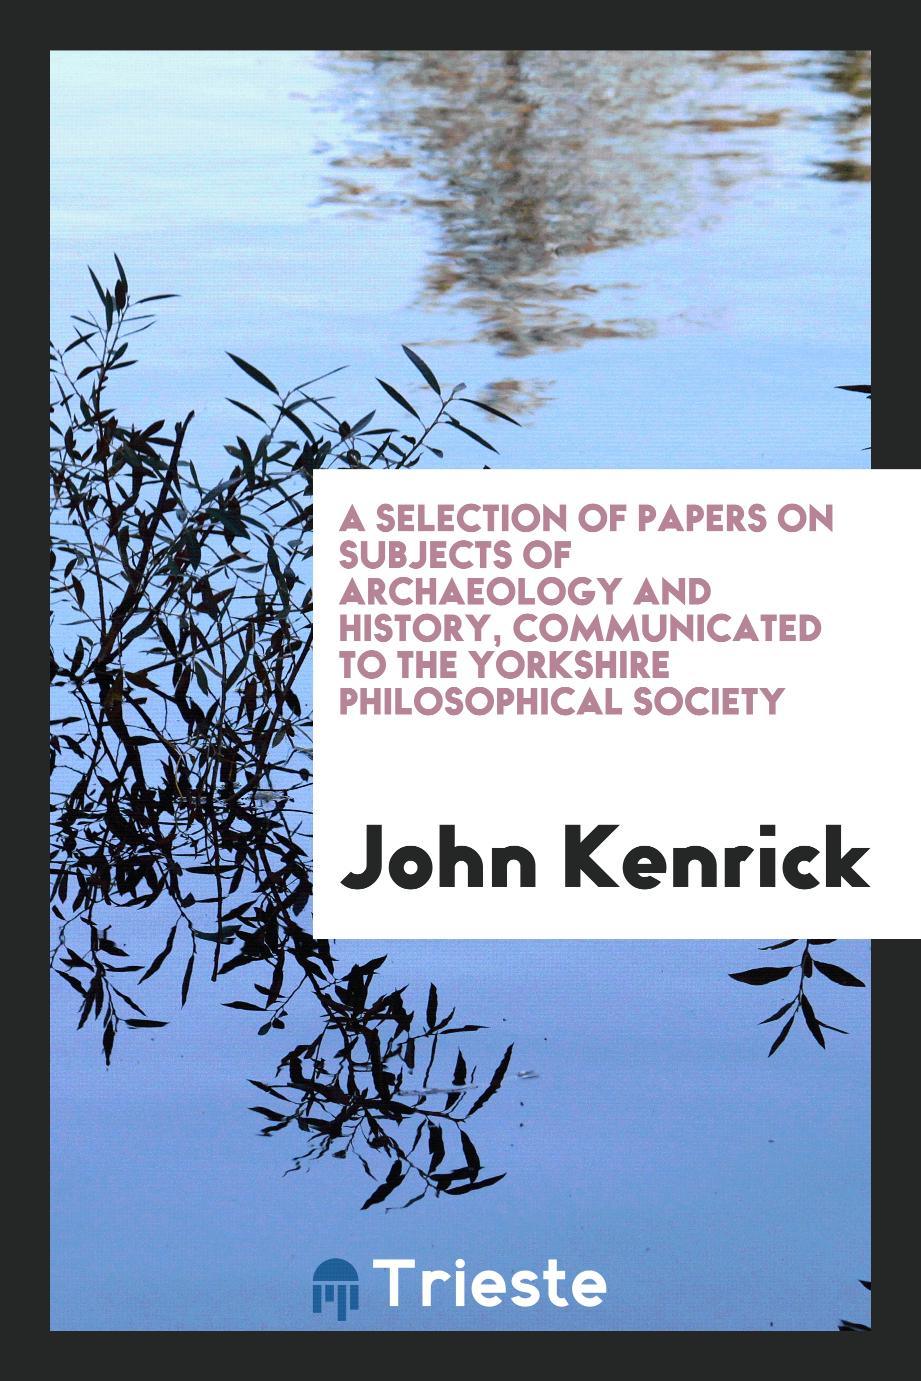 A selection of papers on subjects of archaeology and history, communicated to the Yorkshire Philosophical Society